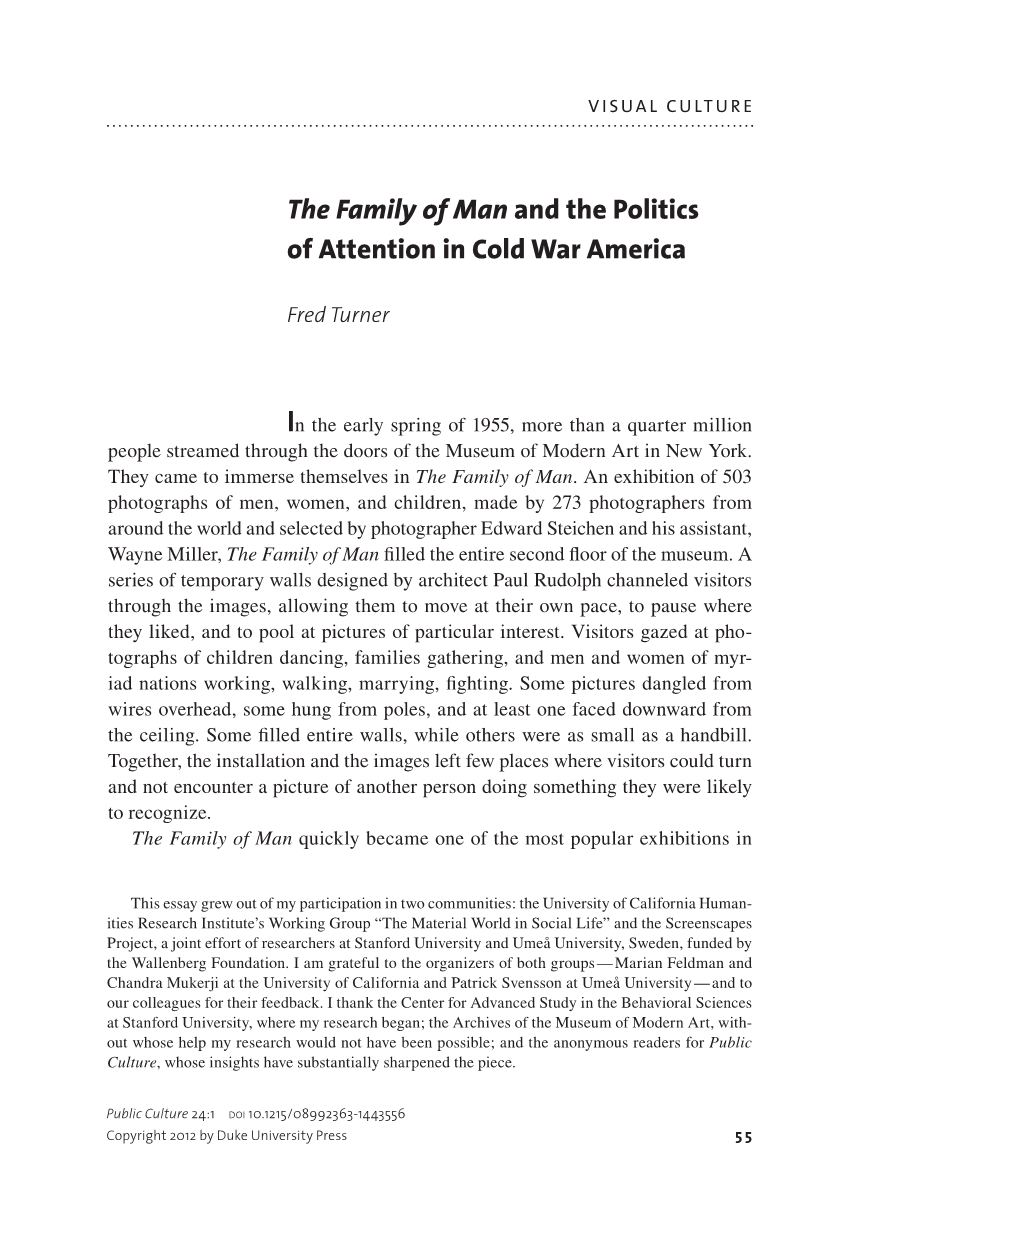 The Family of Man and the Politics of Attention in Cold War America